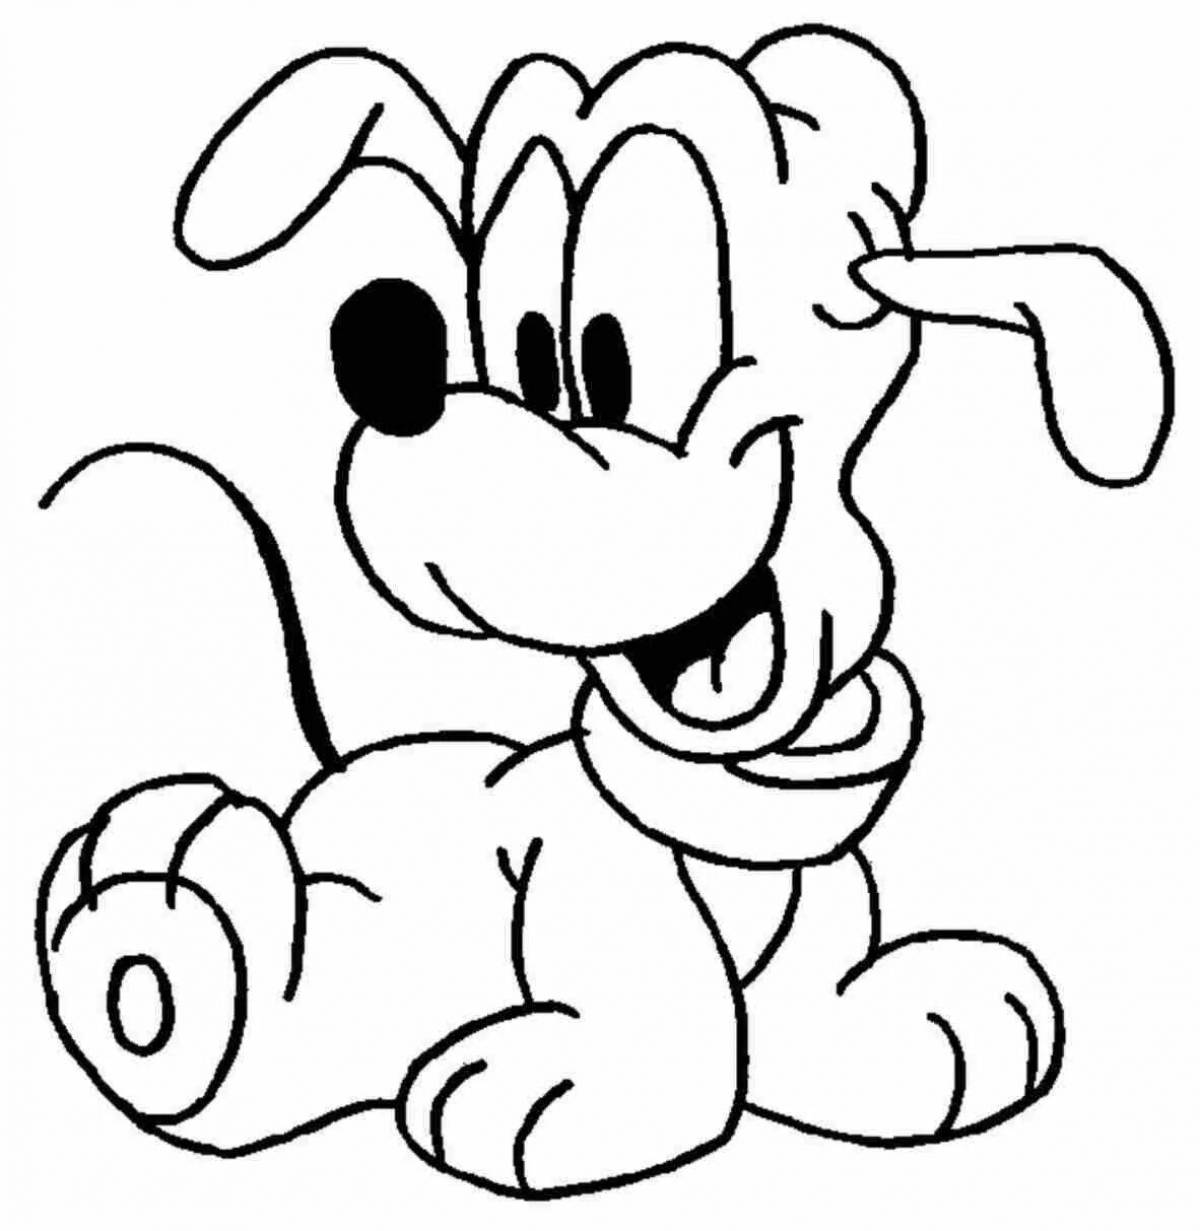 Adorable cartoon characters coloring page